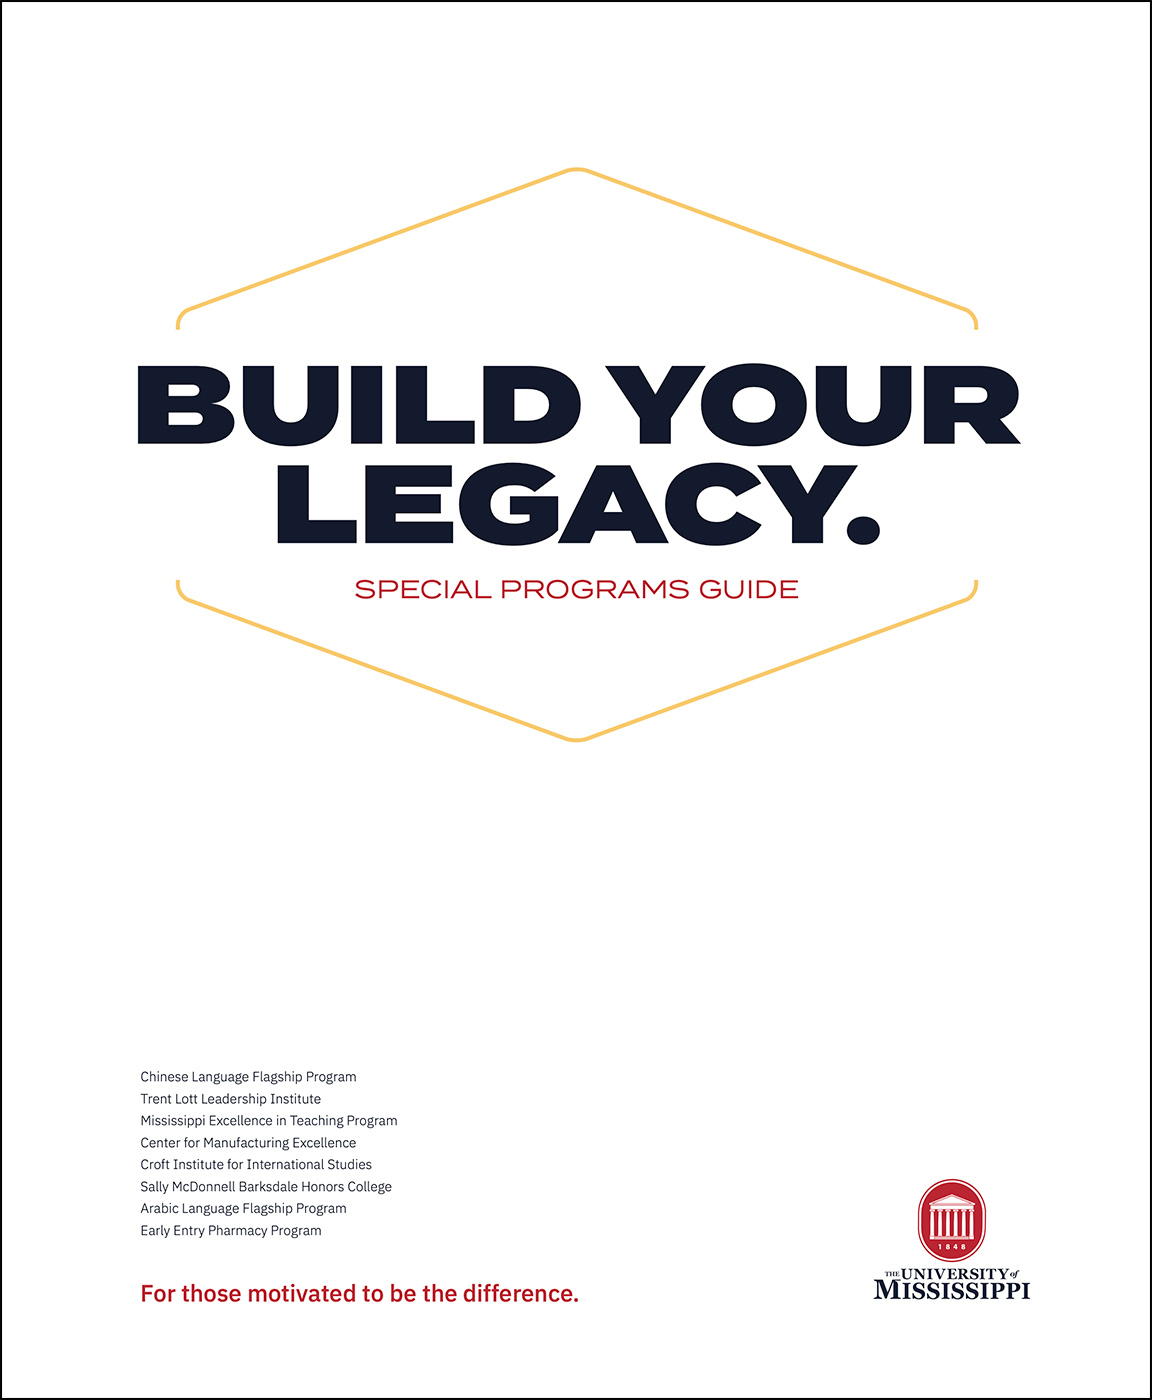 Special Programs 2023-24 cover - Title: "Build Your Legacy. Special Programs Guide."